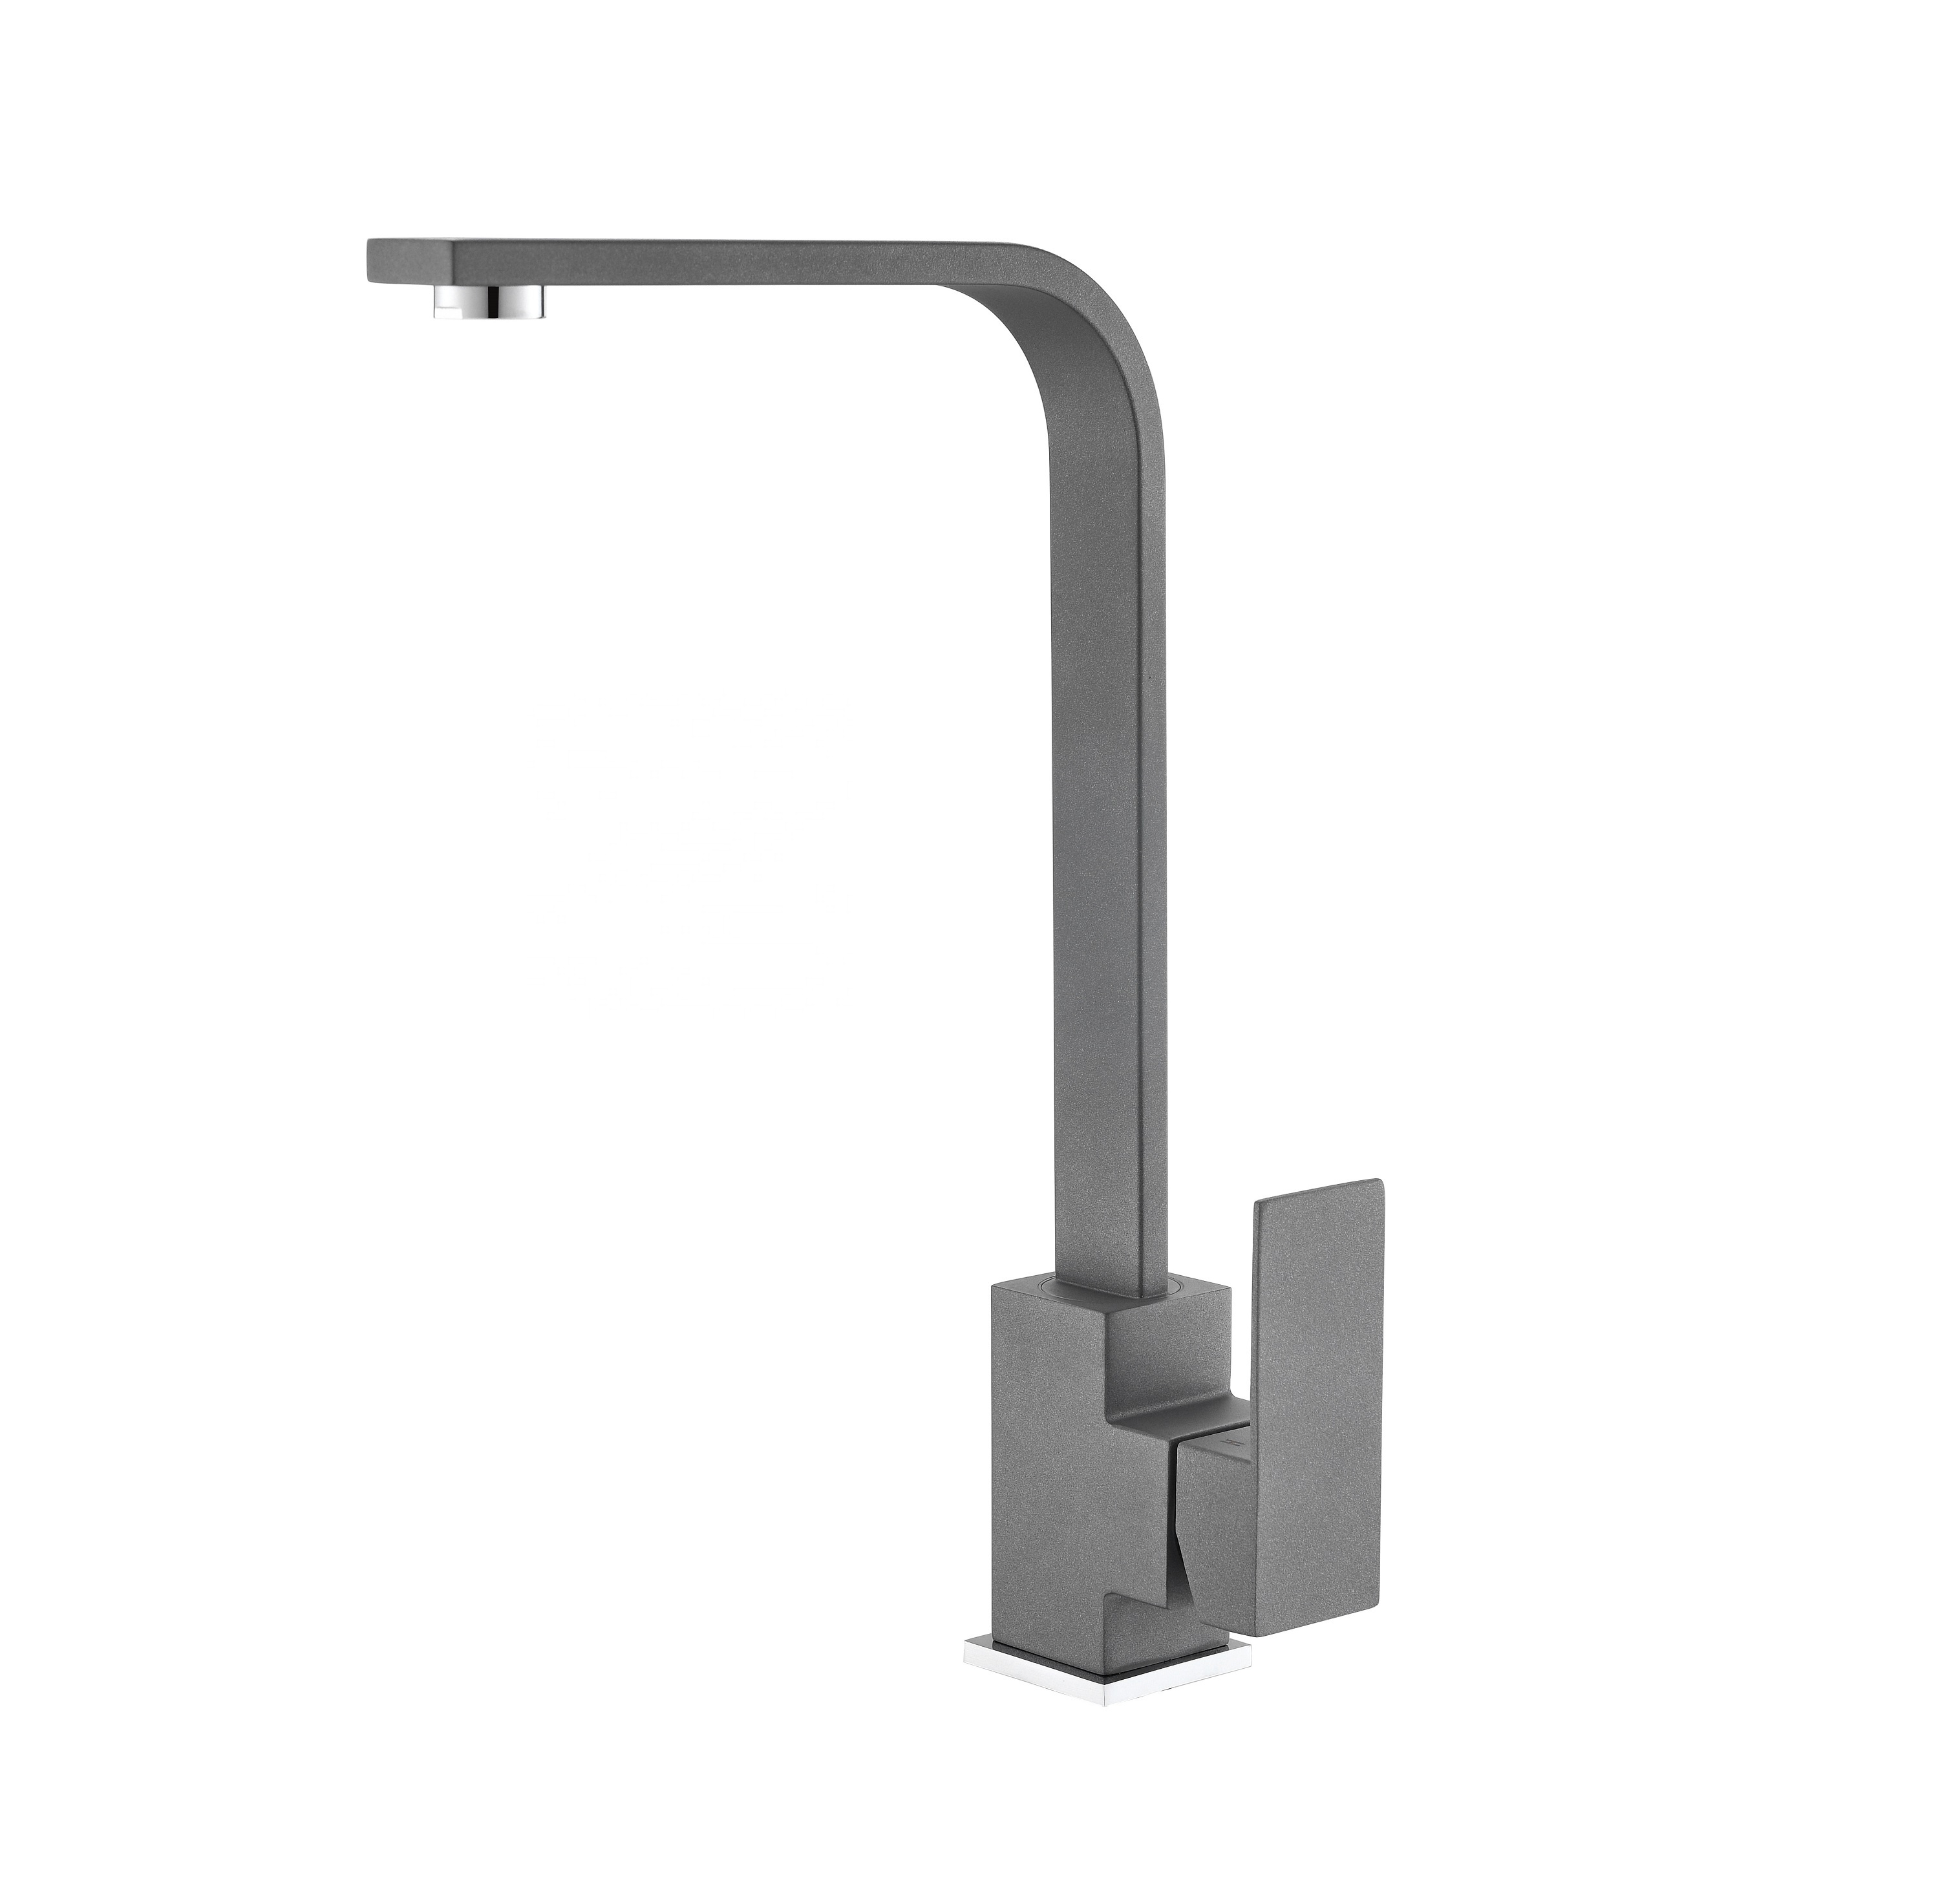 The Square Faucet Matte Black New Design Modern Pull Out Spray Kitchen Faucet